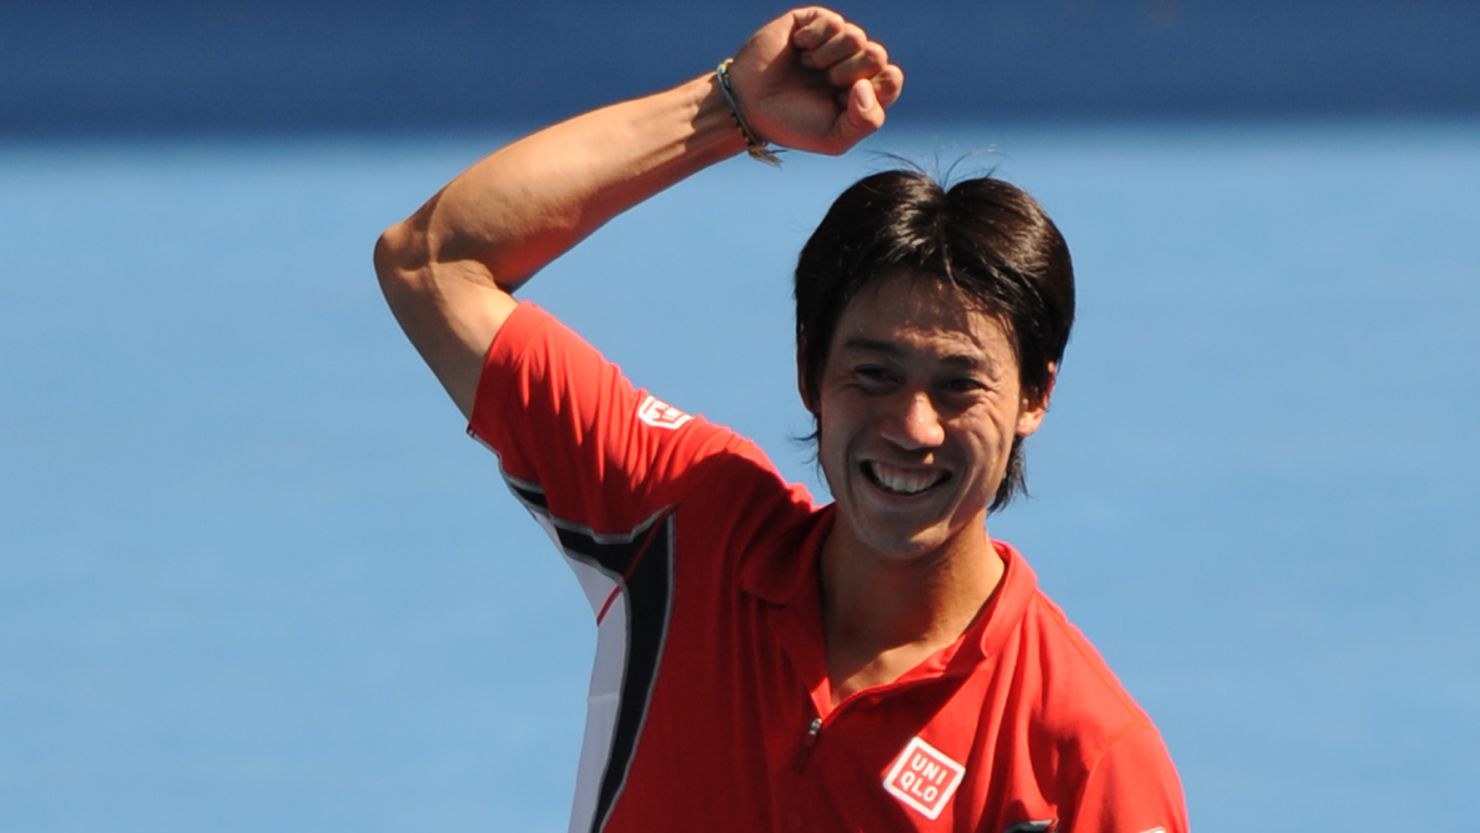 Kei Nishikori has reached the quarterfinals of a grand slam for the first time in his career.